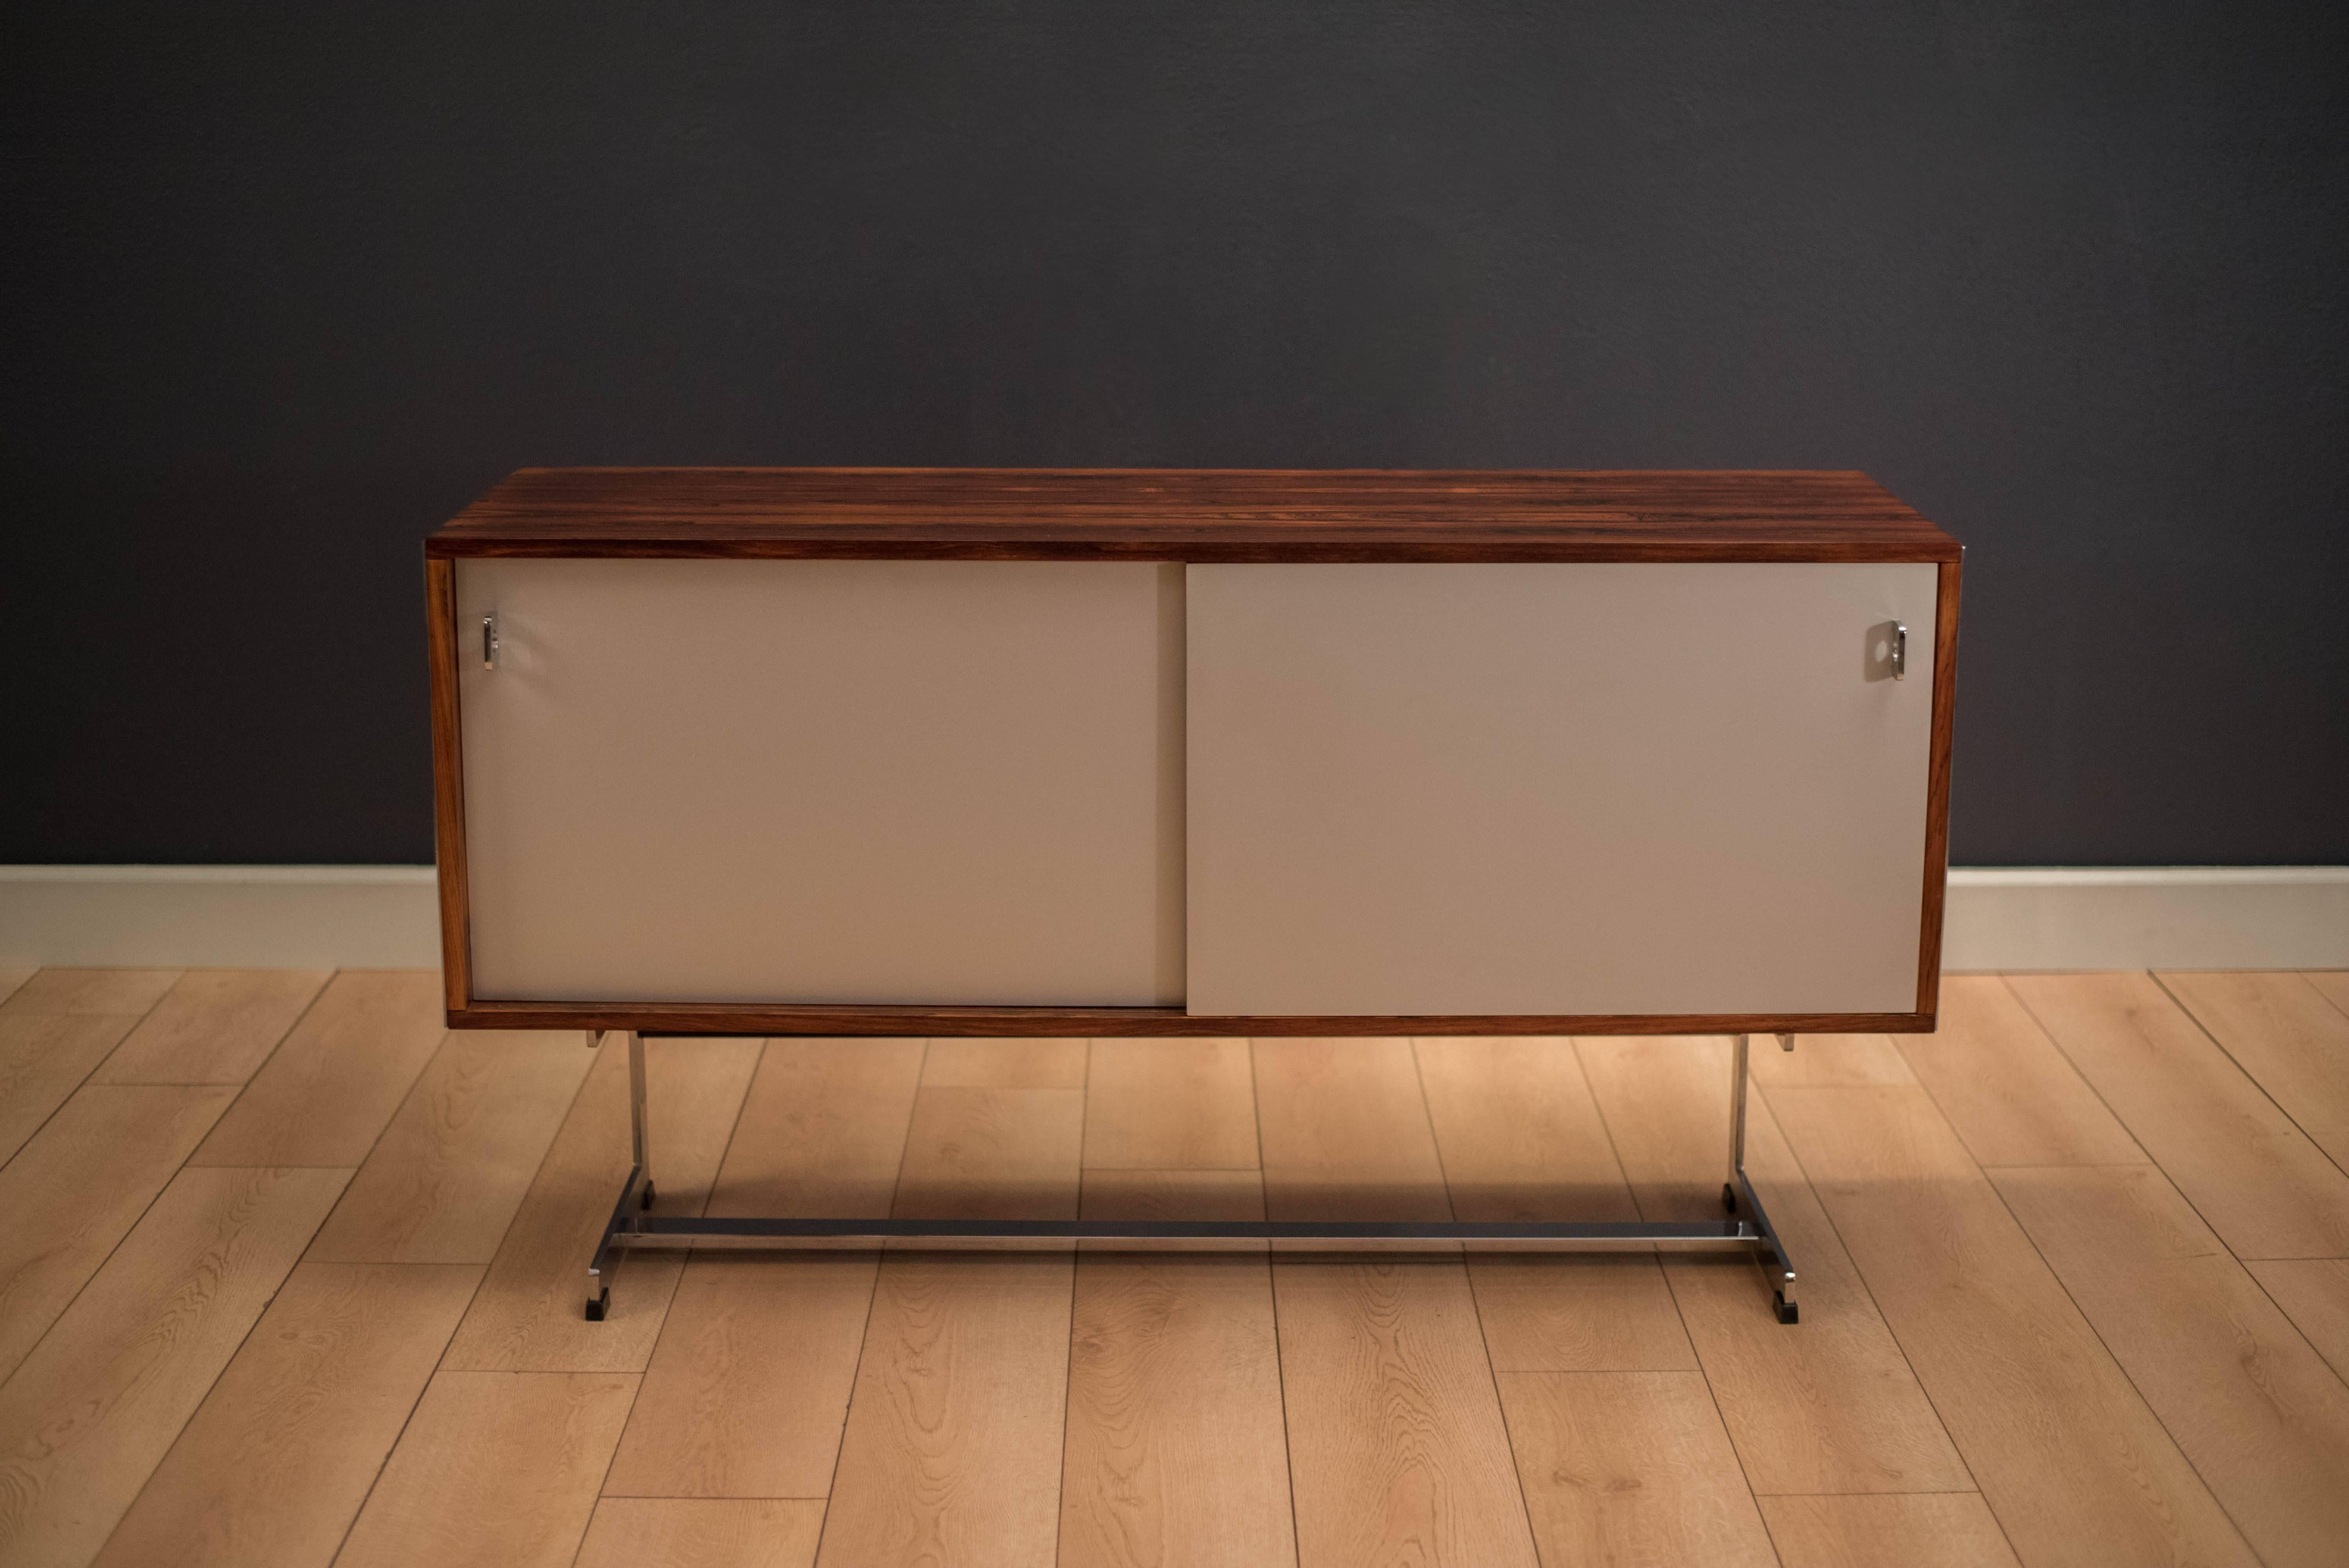 Mid-Century Modern credenza by Richard Young for Merrow Associates in rosewood. This piece features sliding aluminum doors with chrome side panels, pulls, and base. Interior cabinet includes open storage space with two adjustable glass shelves. This